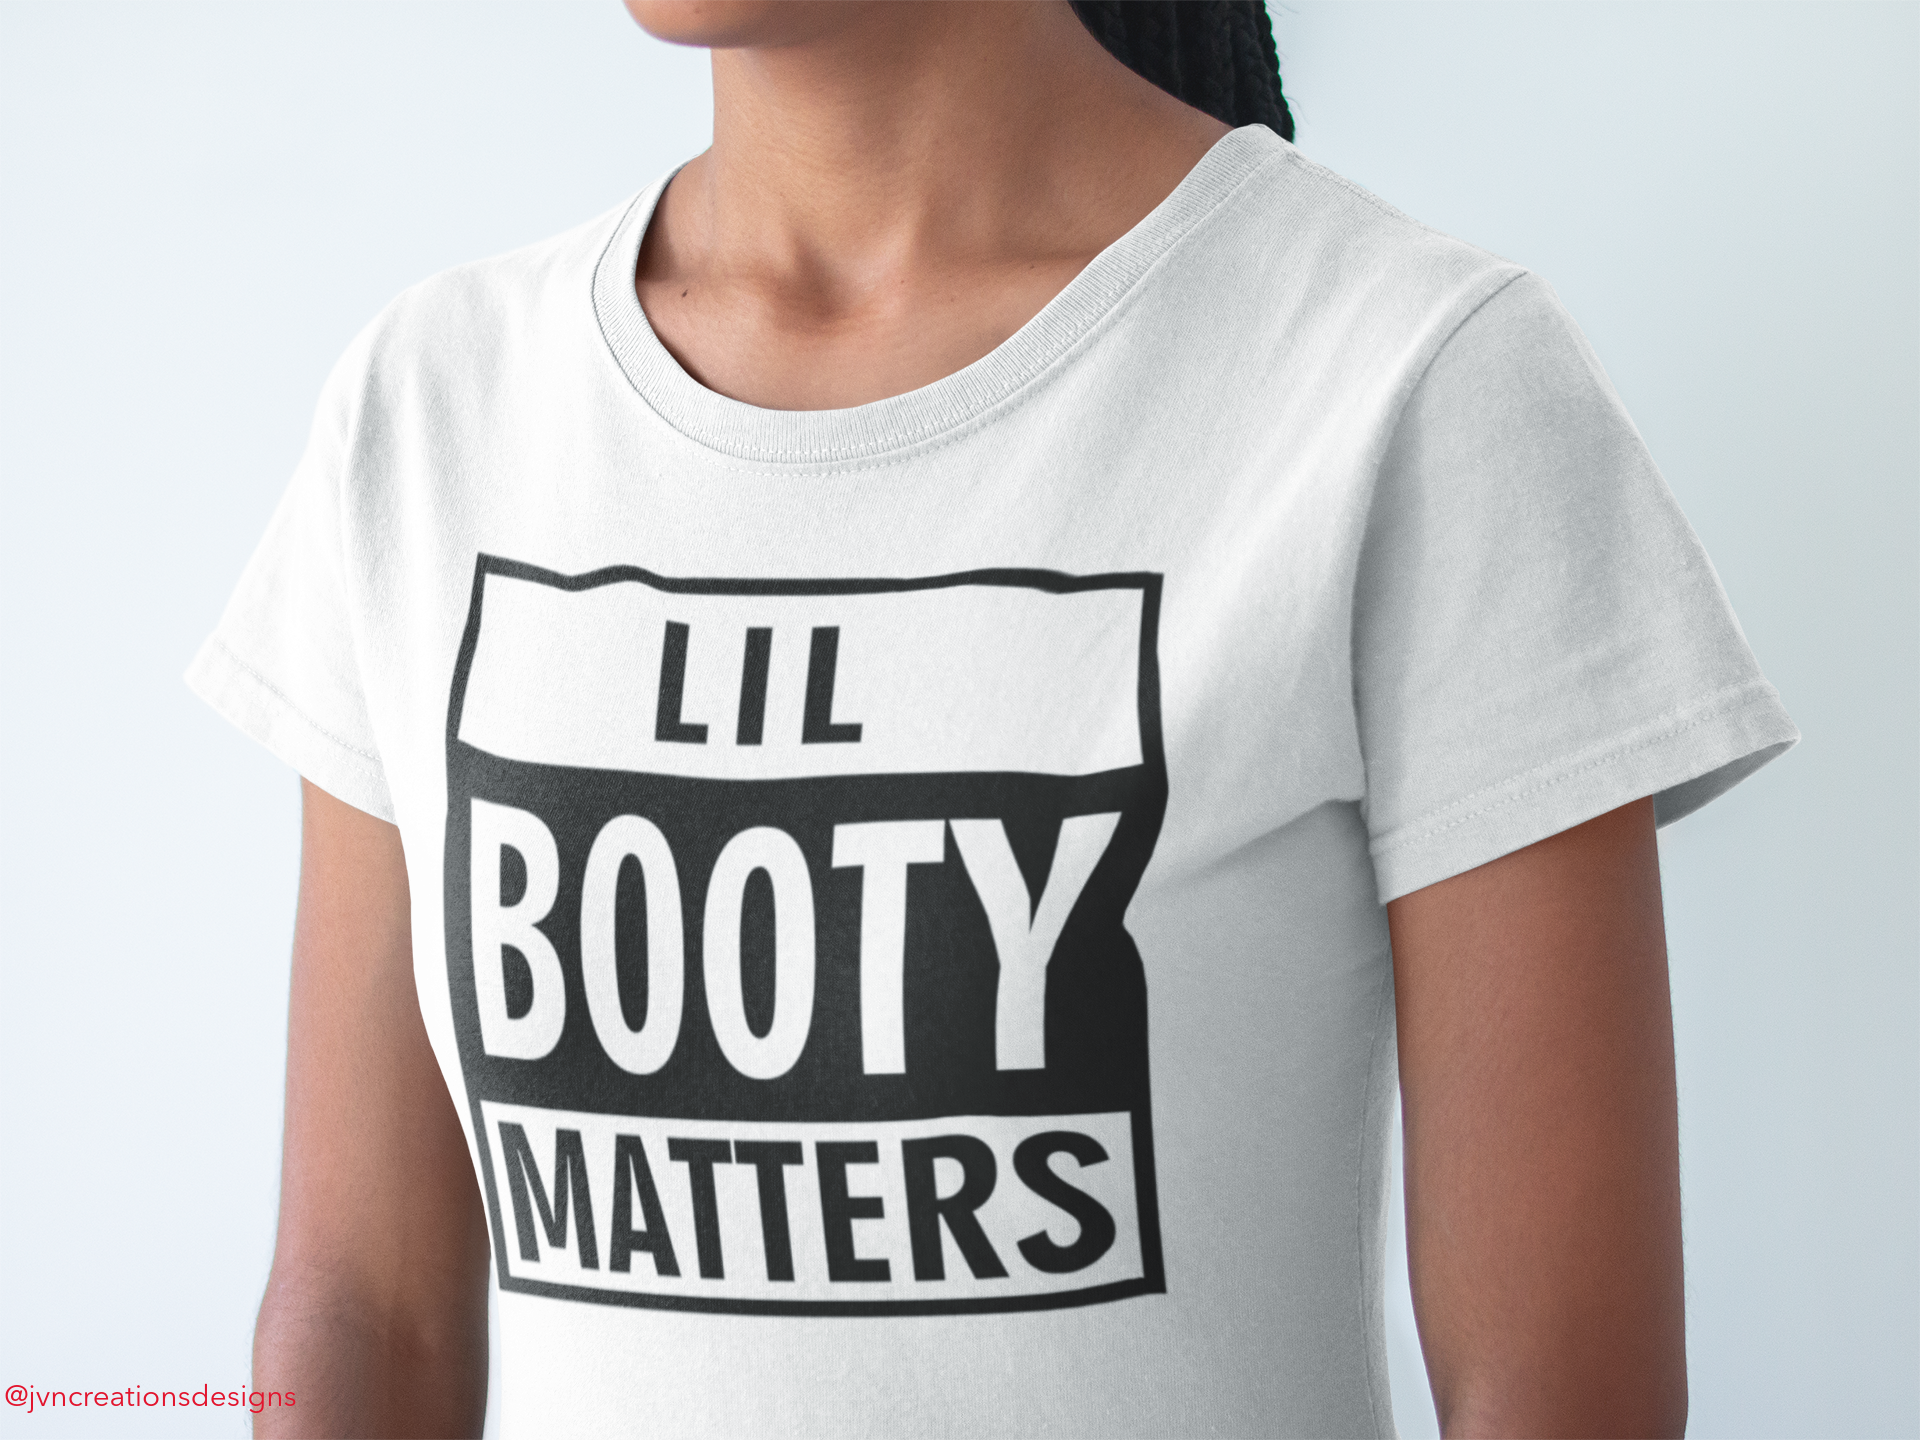 Lil Booty Matters - JVN Creations & Designs